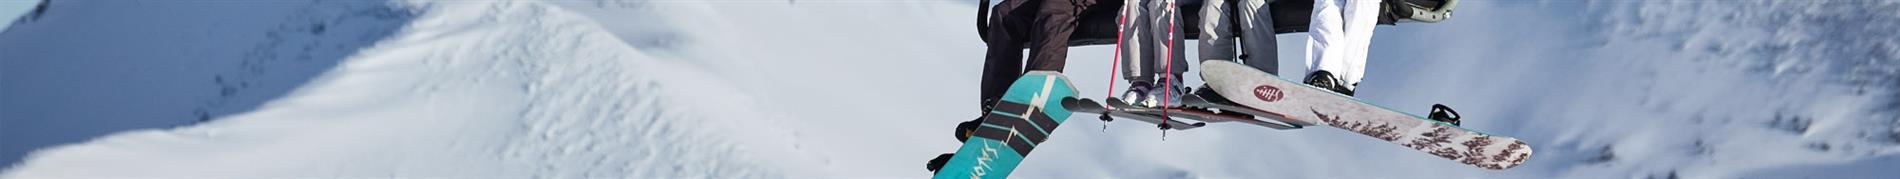 Rossignol Women's skis, snowboards, and accessories for everything snow. 